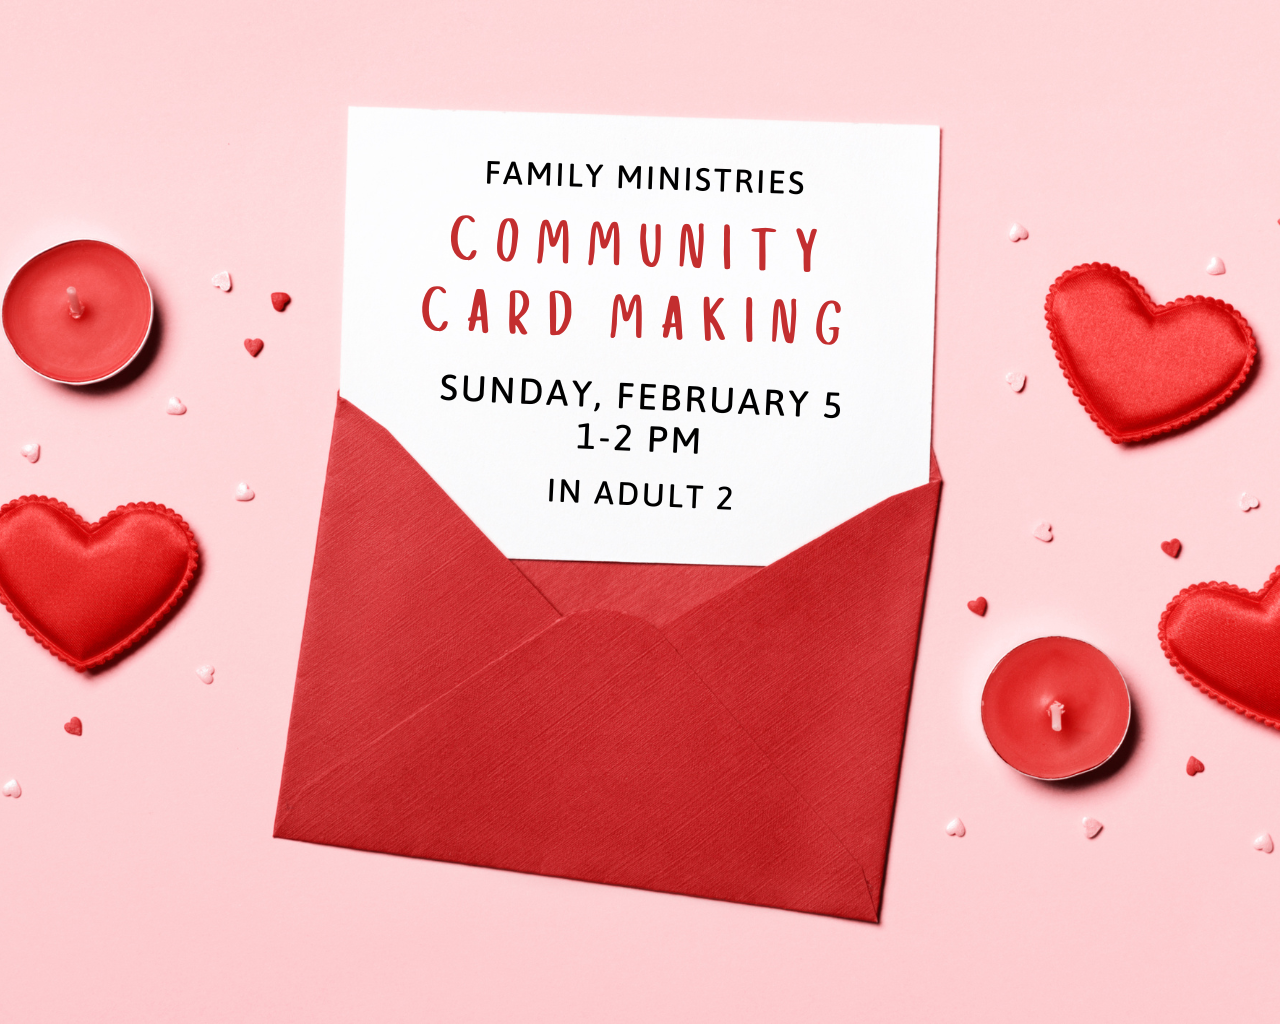 Image for Family Ministries Community Card Making